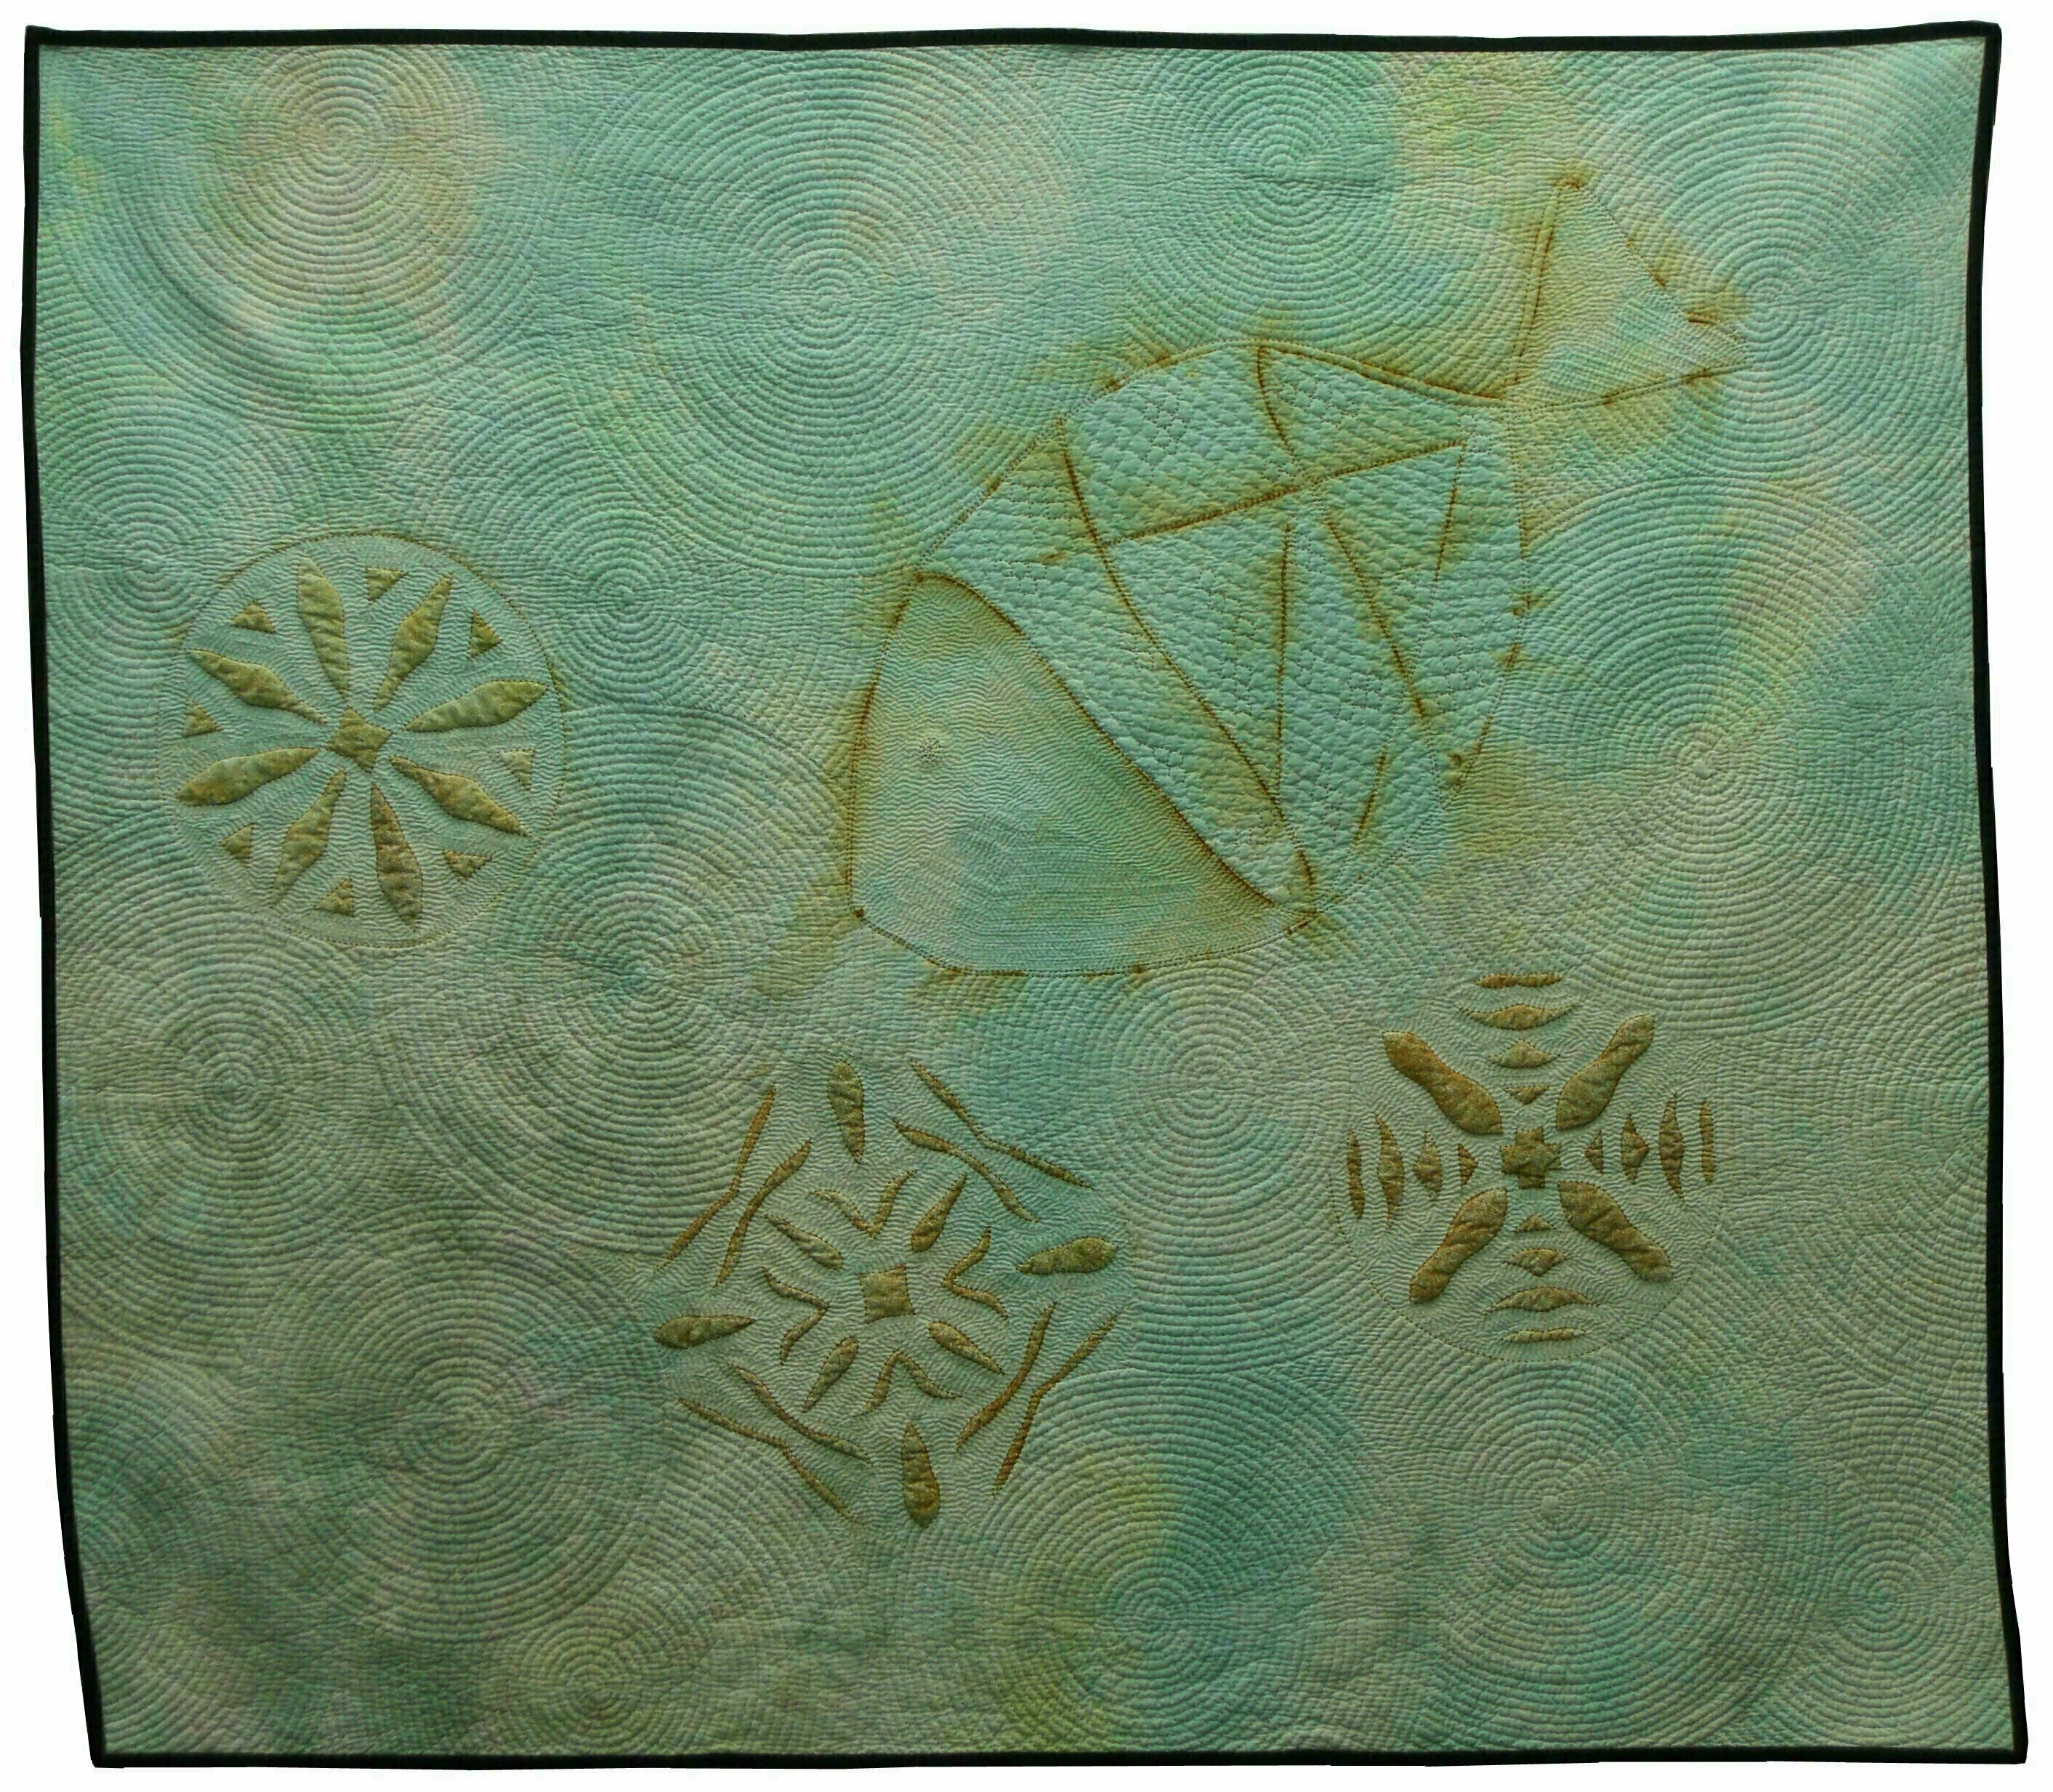 Jean Judd: 'Contaminated Water 5 Mutated SandDollar RustedFish', 2012 Textile Art, Abstract.  This is piece is a continuation of the Contaminated Water series.  Rust pigmentation on hand dyed fabric sets the tone of the textile artwork.  The visual and physical texture created by the dense hand stitching used to create the overall design really makes the piece pop and adds dimension as...